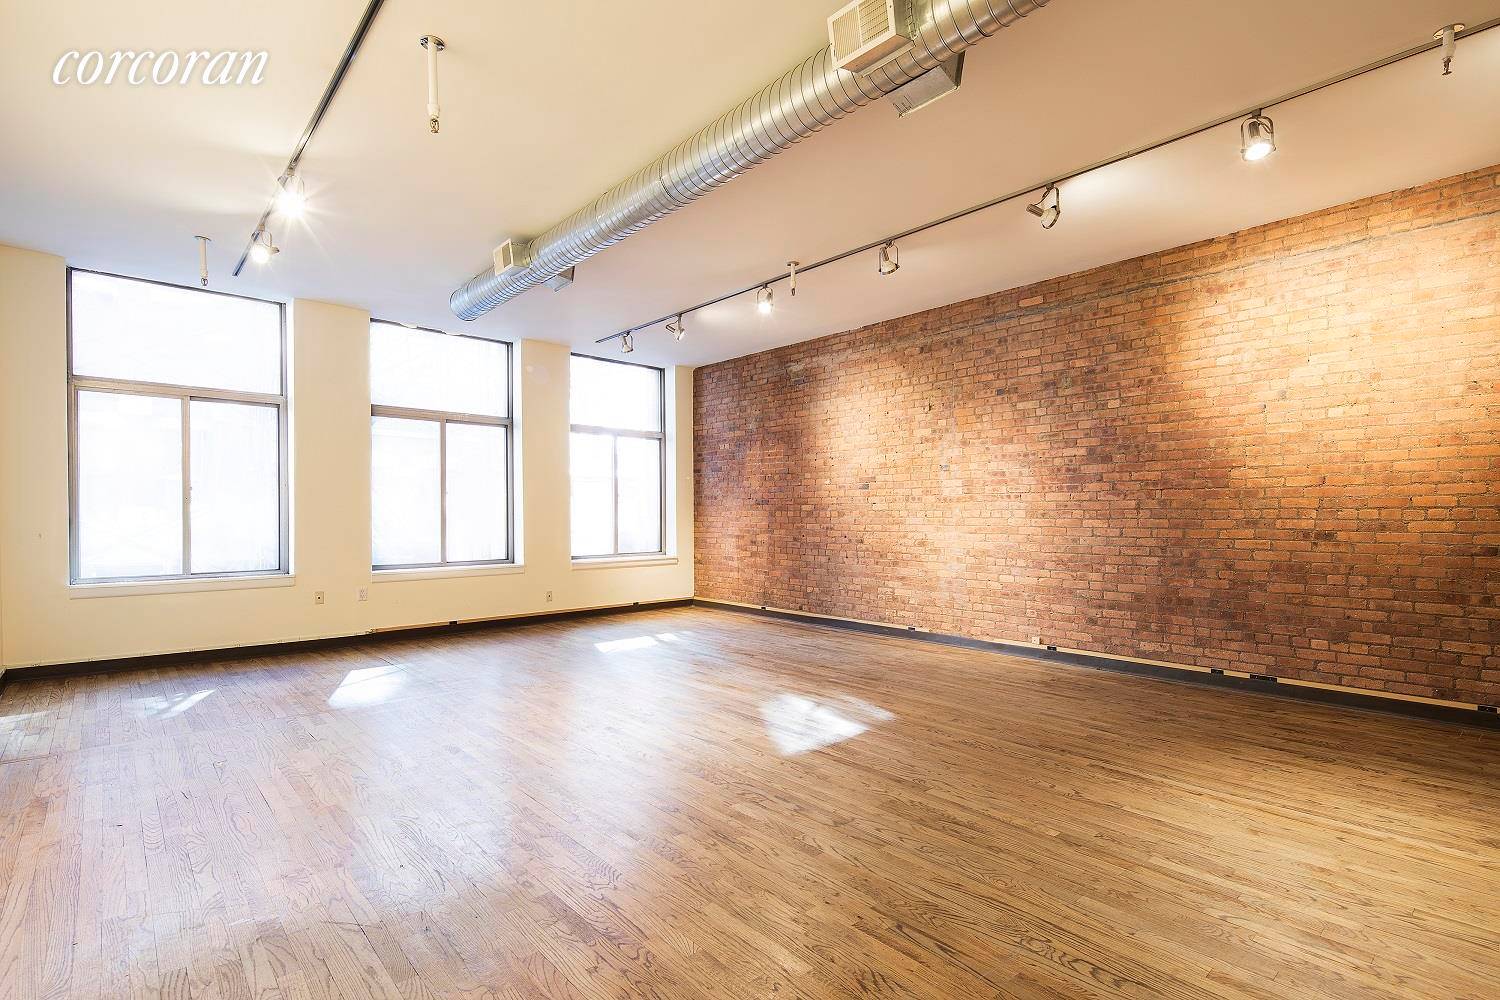 This is a unique and intimate commercial loft space with a prime address in Tribeca.